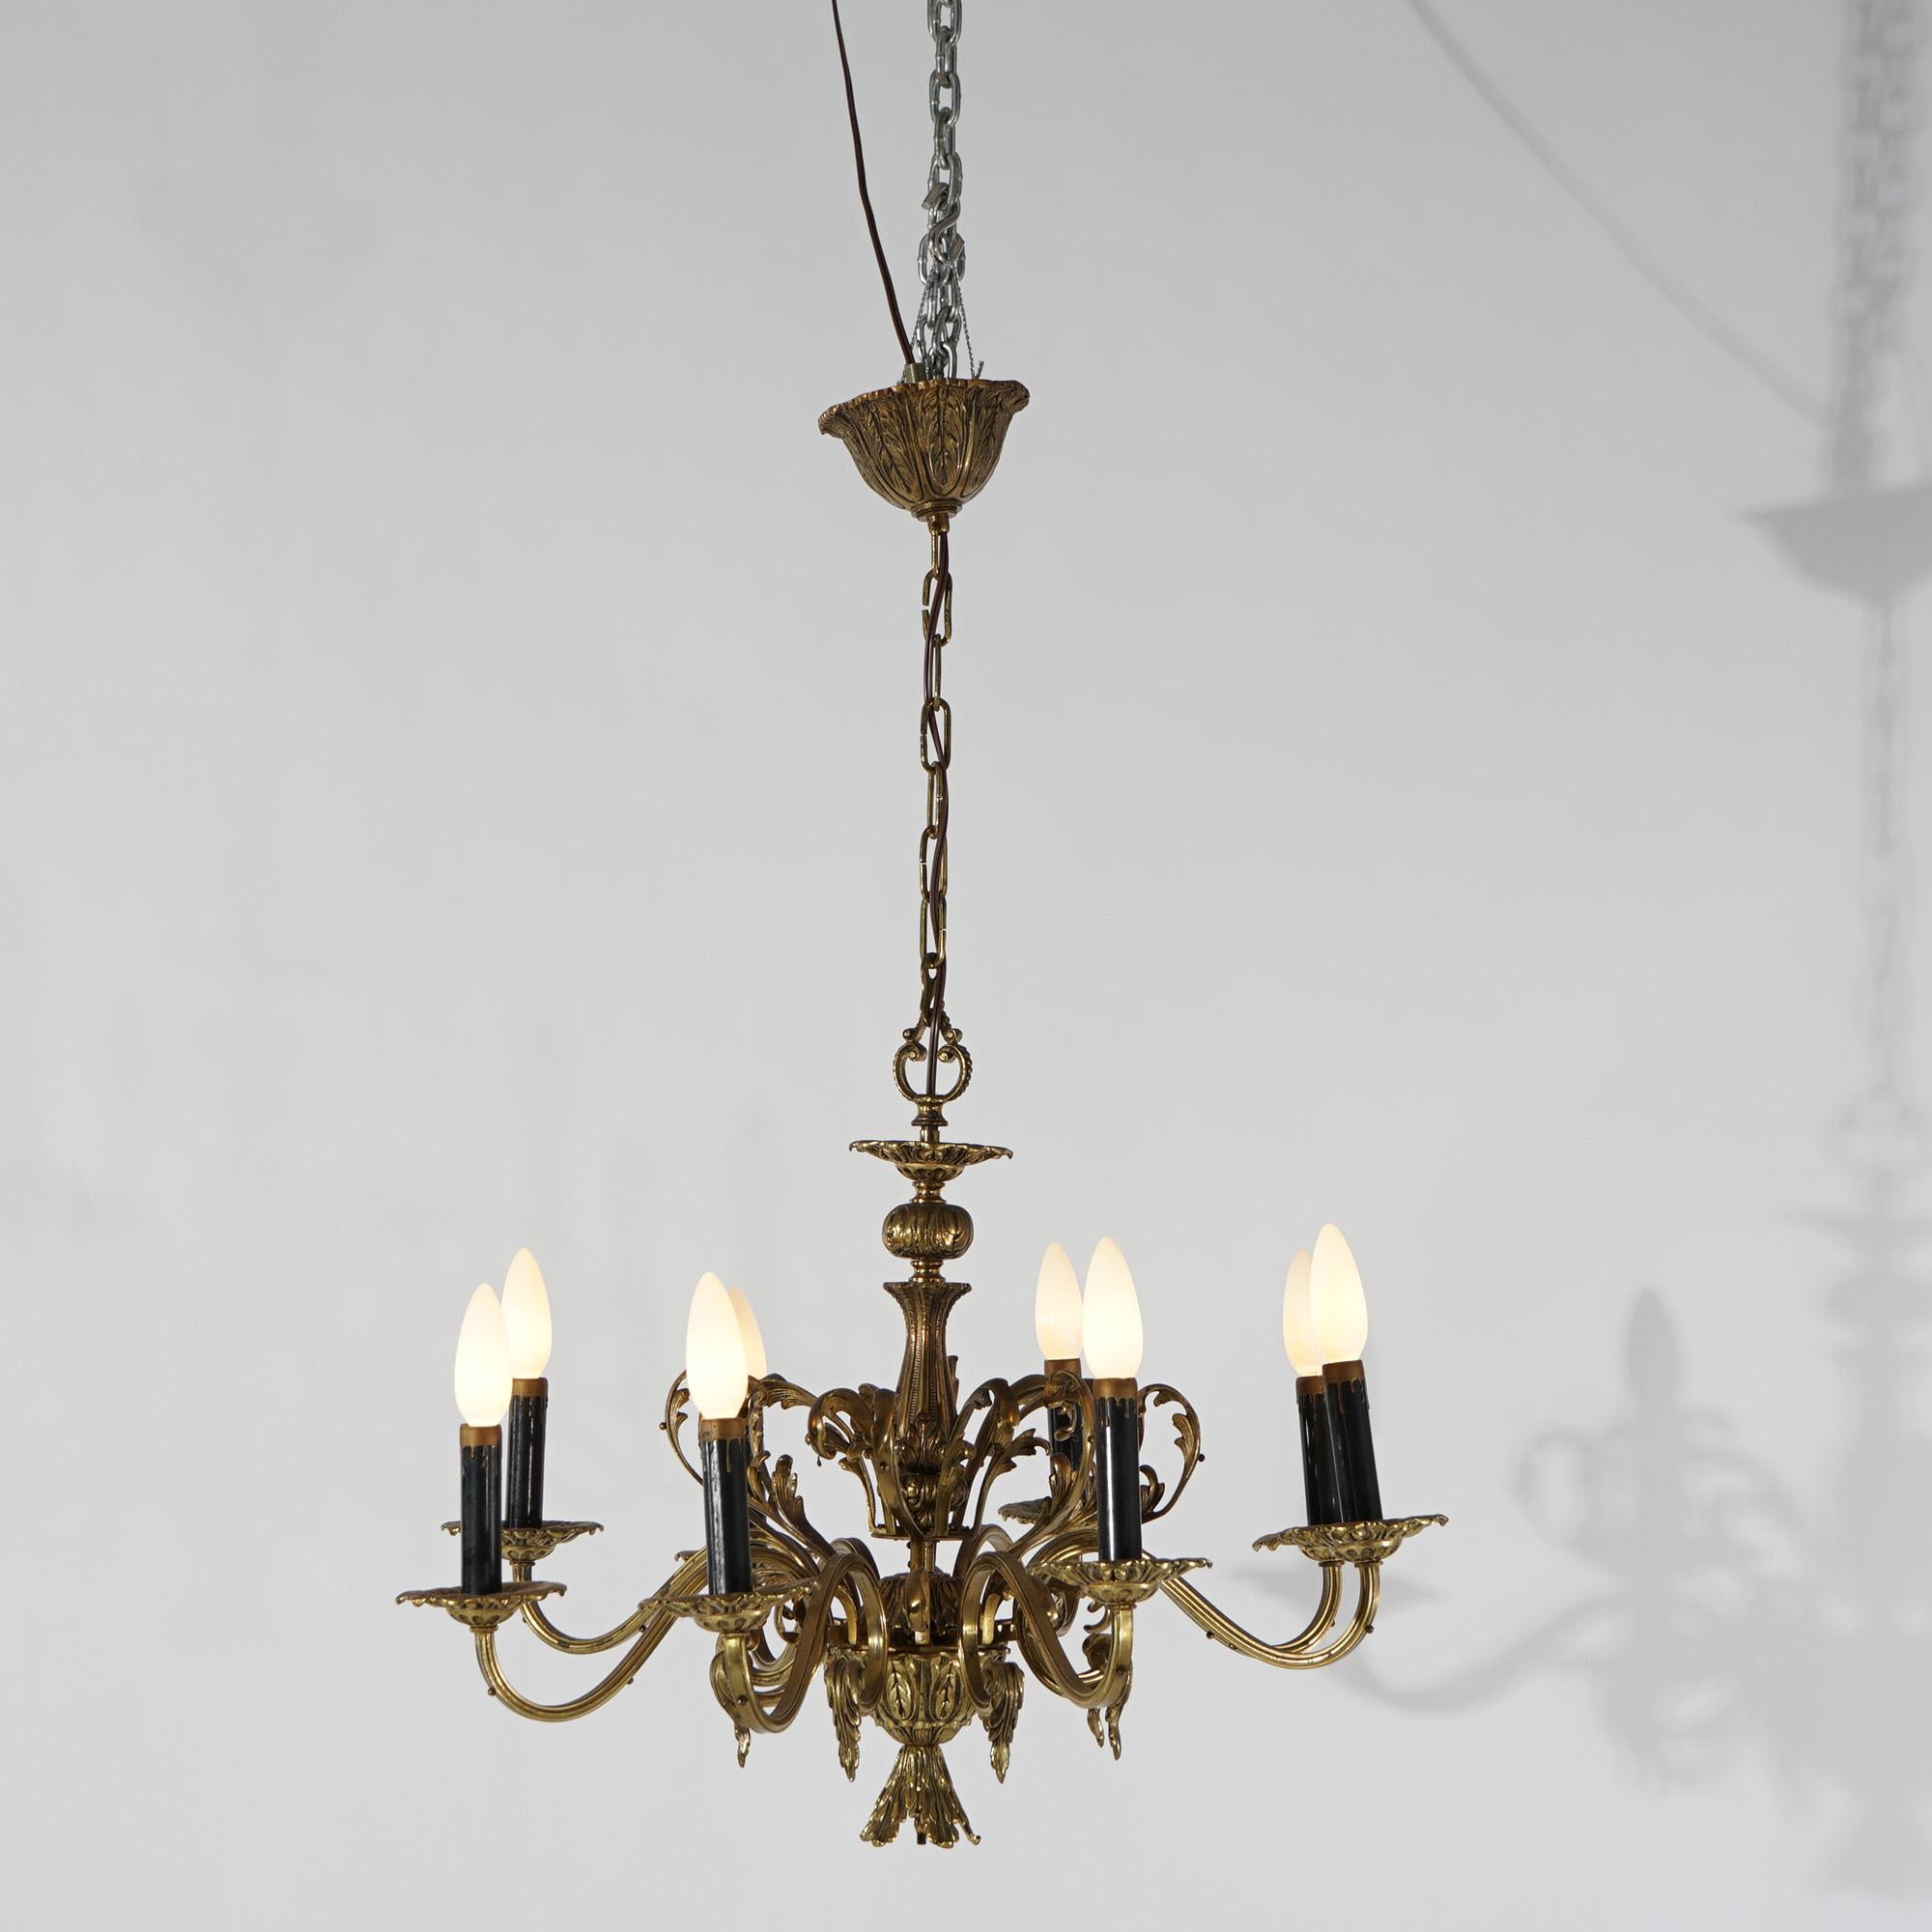 American Antique French Empire Bronzed Metal Eight-Light Chandelier, circa 1940 For Sale